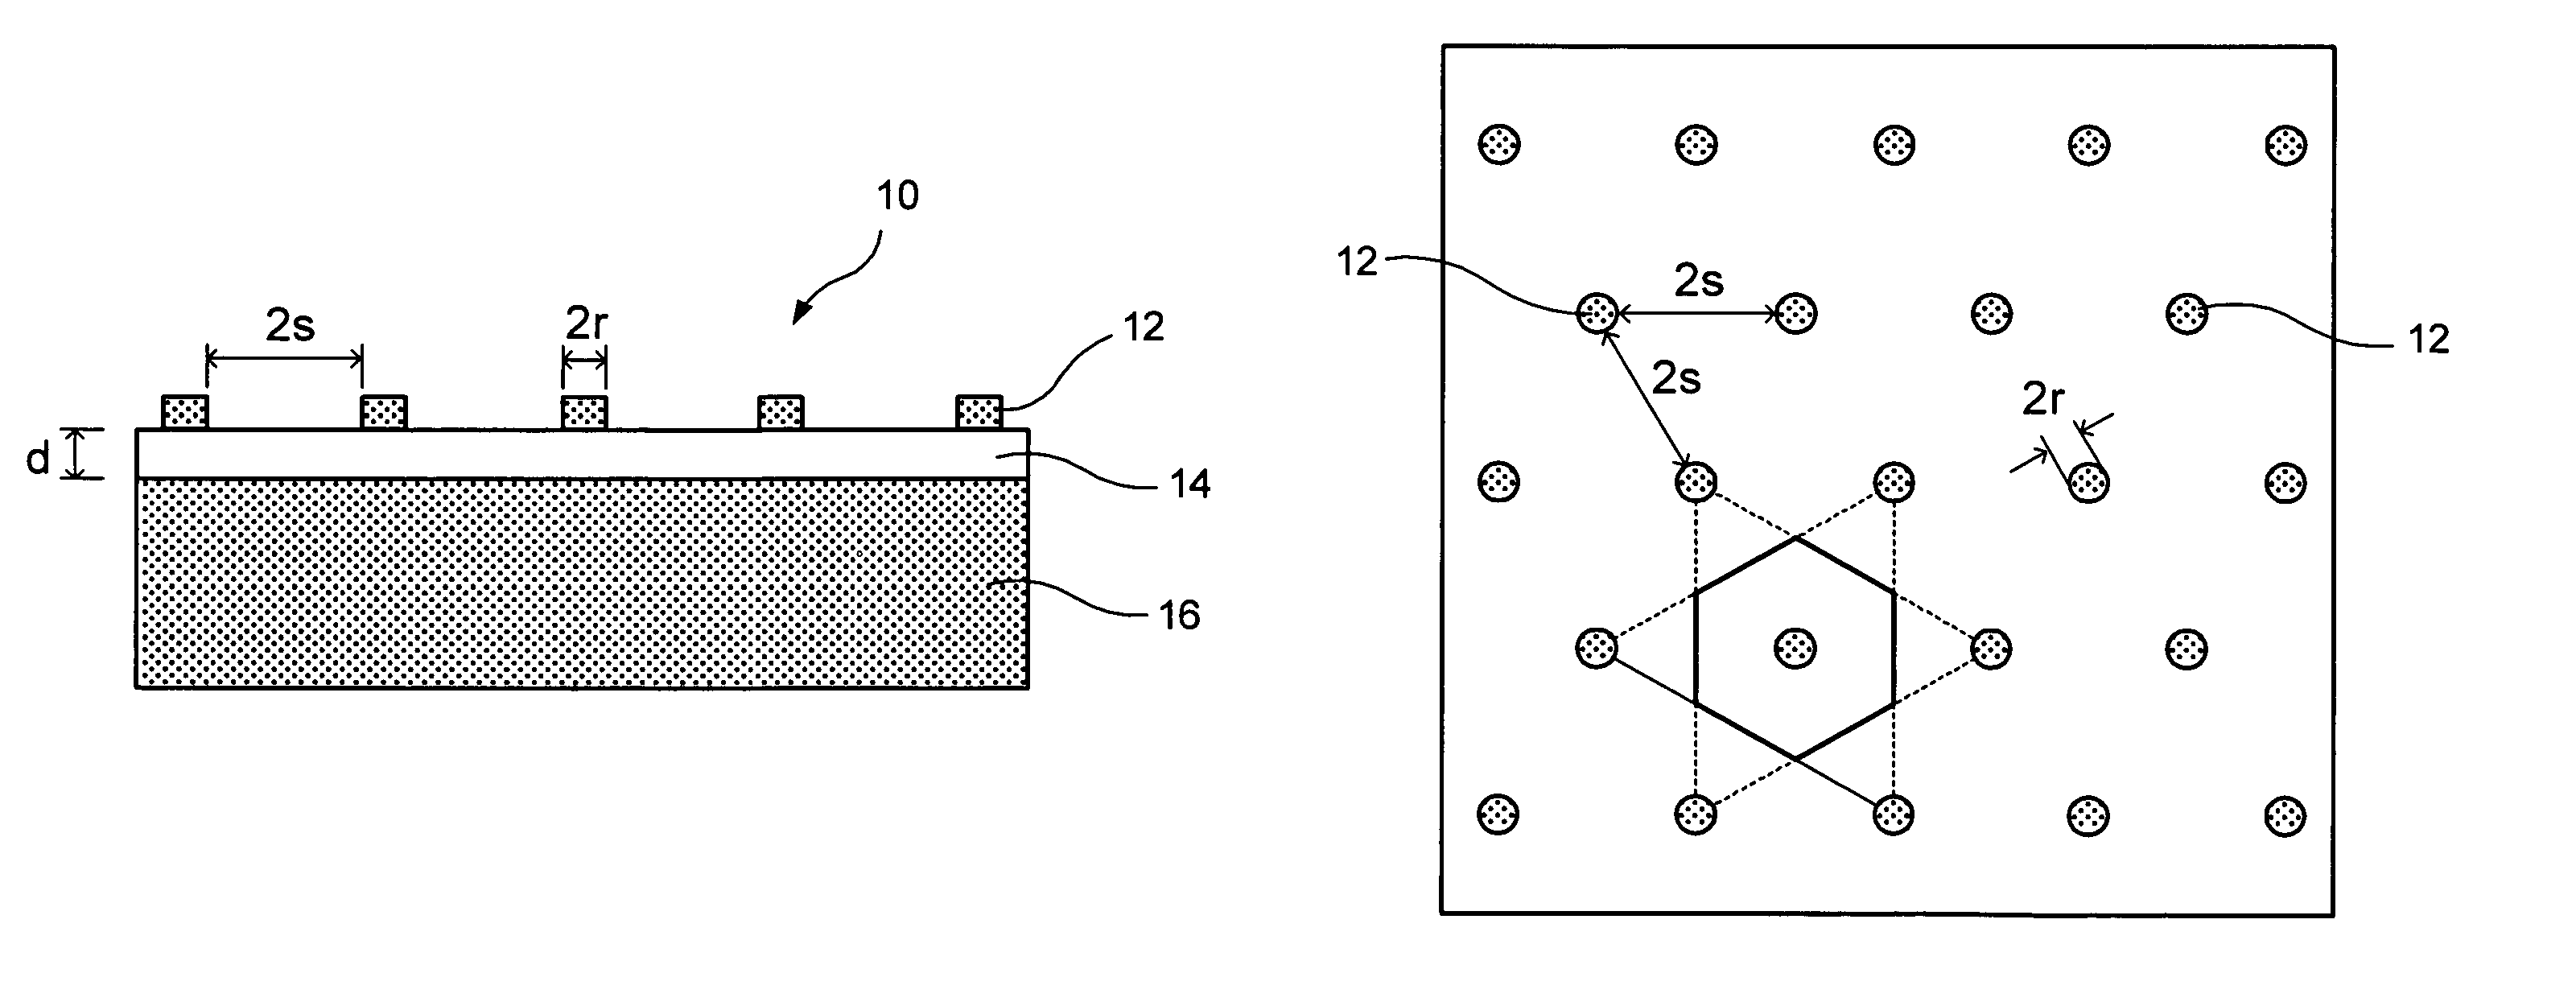 Large-area PIN diode with reduced capacitance